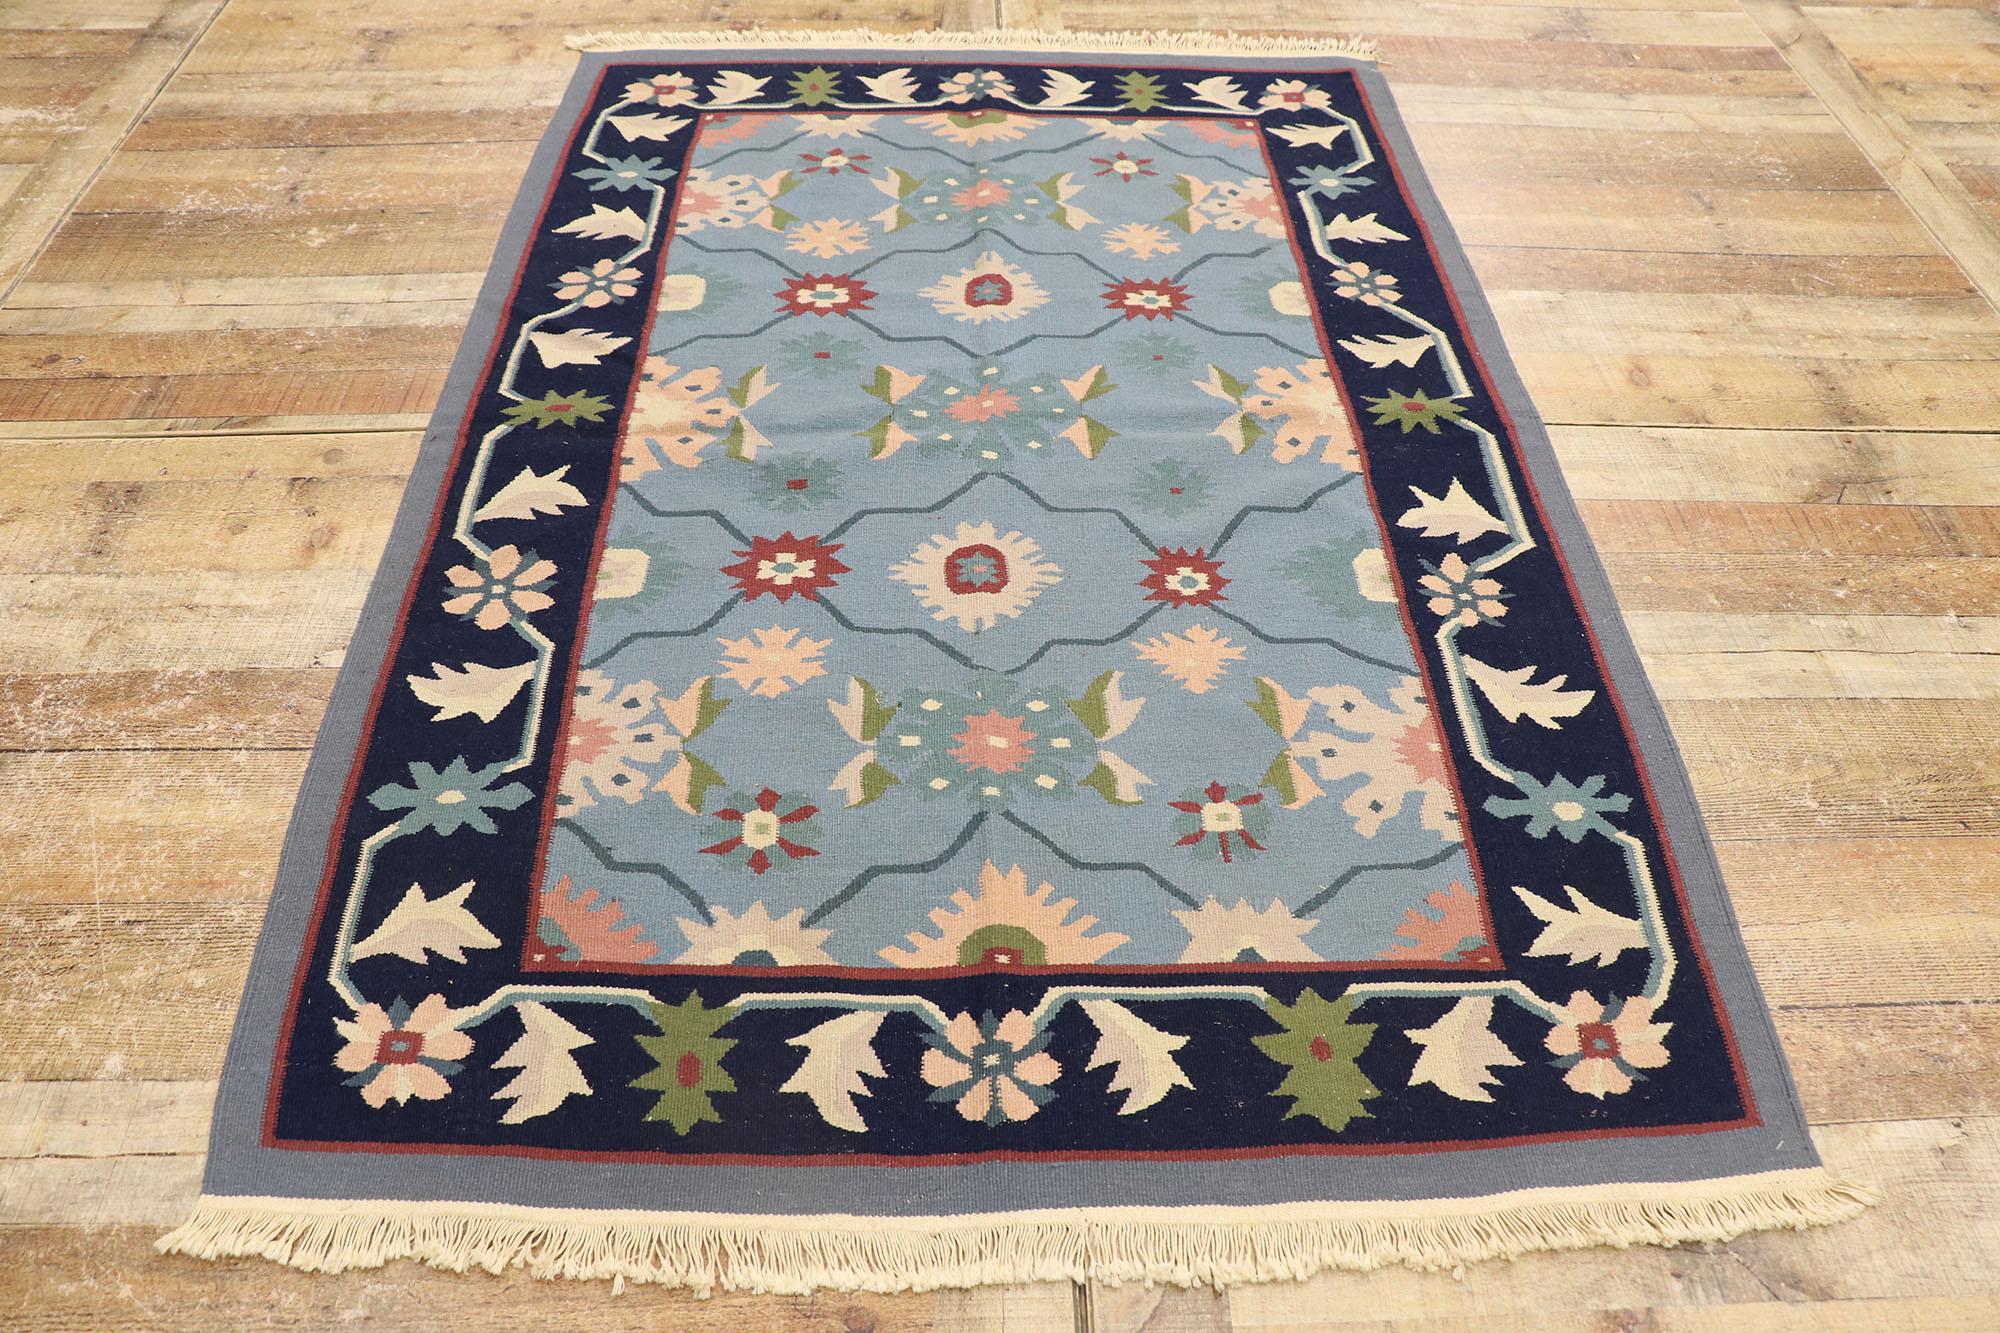 Vintage Romanian Floral Kilim Rug with Folk Art Cottage Style In Good Condition For Sale In Dallas, TX